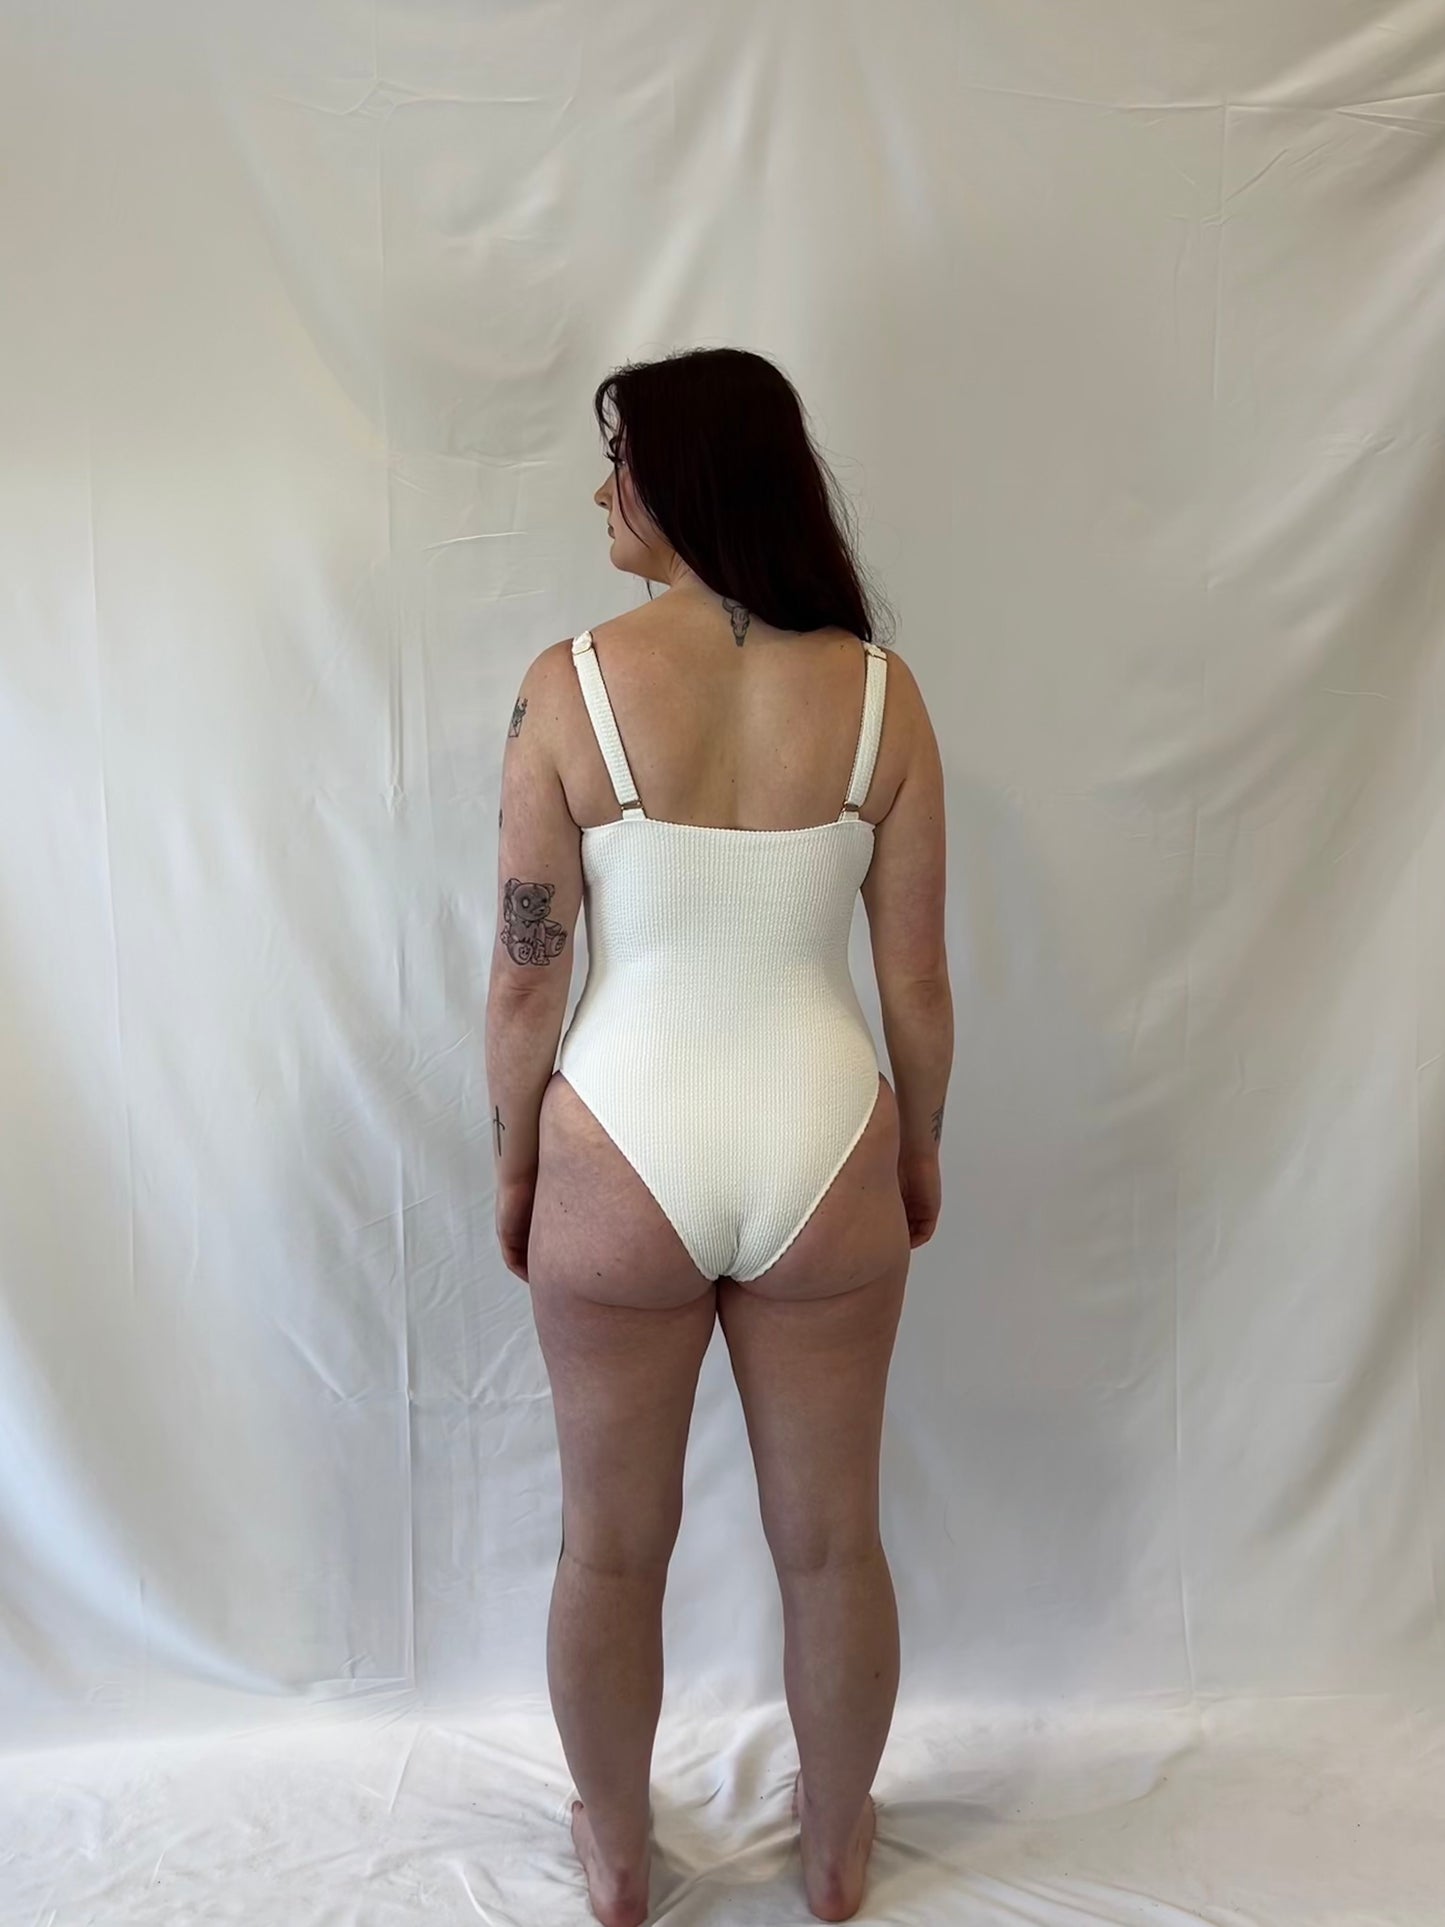 White one piece swimsuit from the back. Woman wears the milkmaid style tie front crinkle fabric one piece. White one piece is high cut and cheeky.  